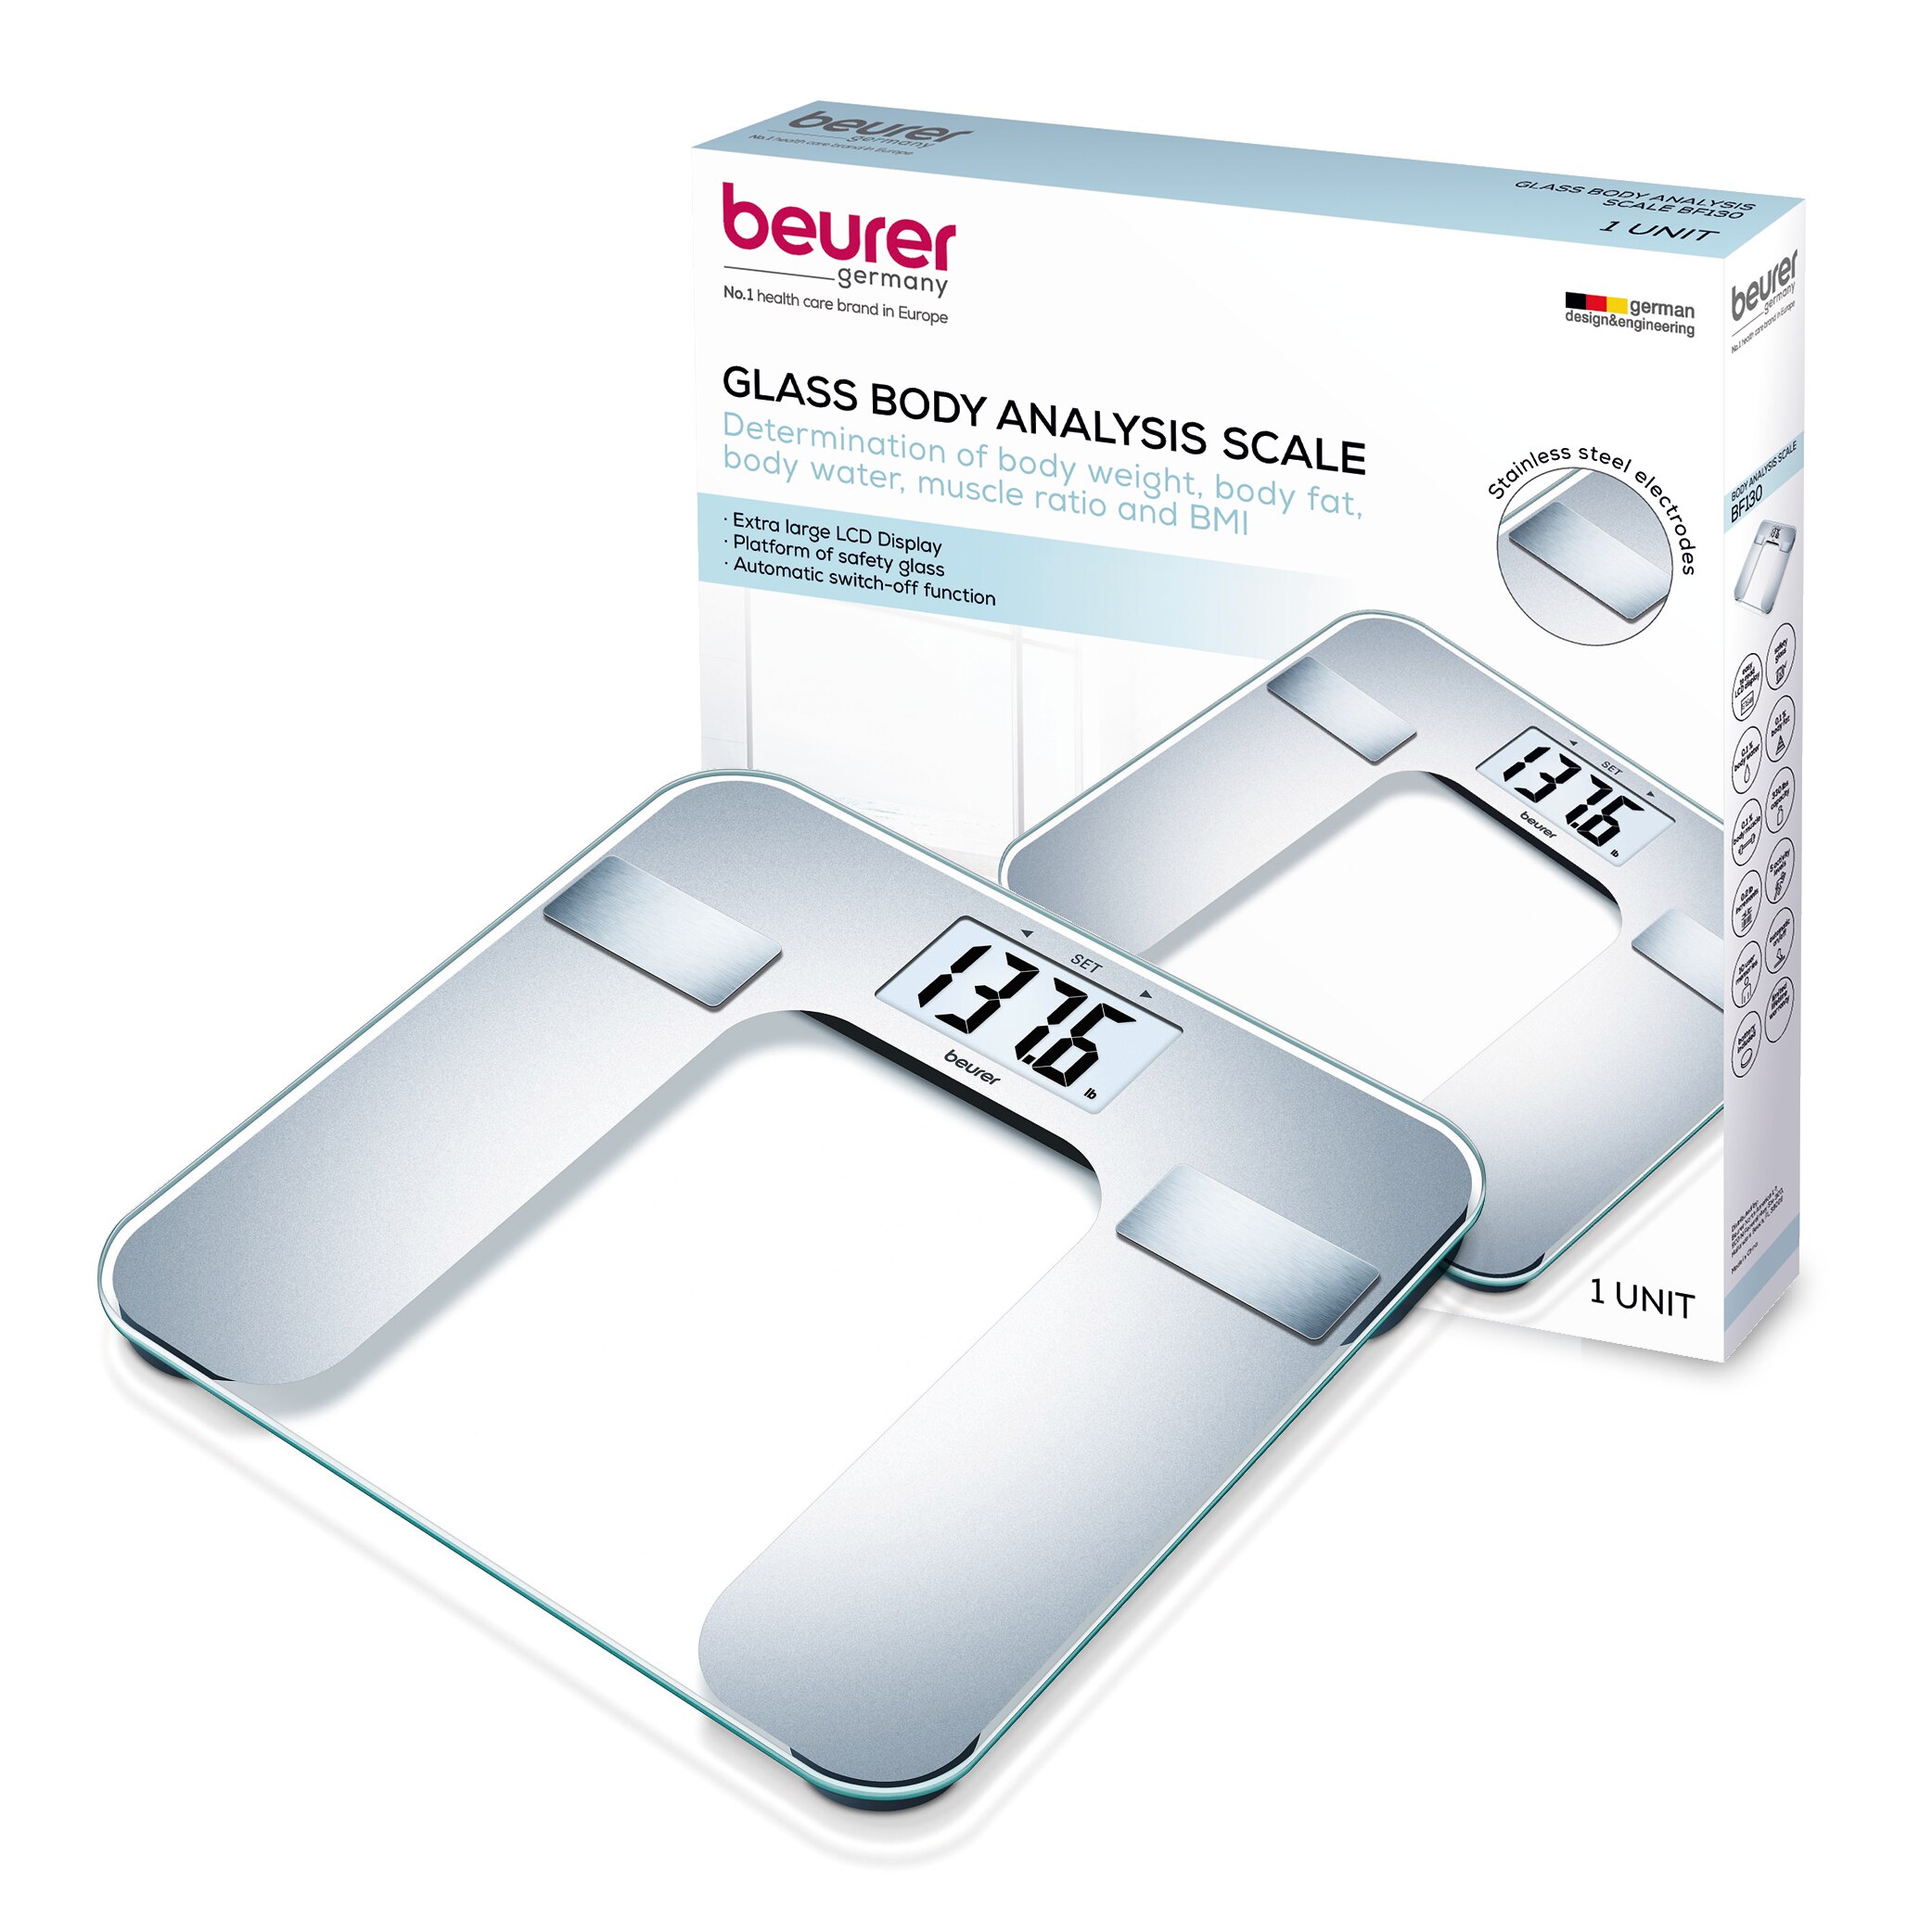 Beurer Personal Glass Scale